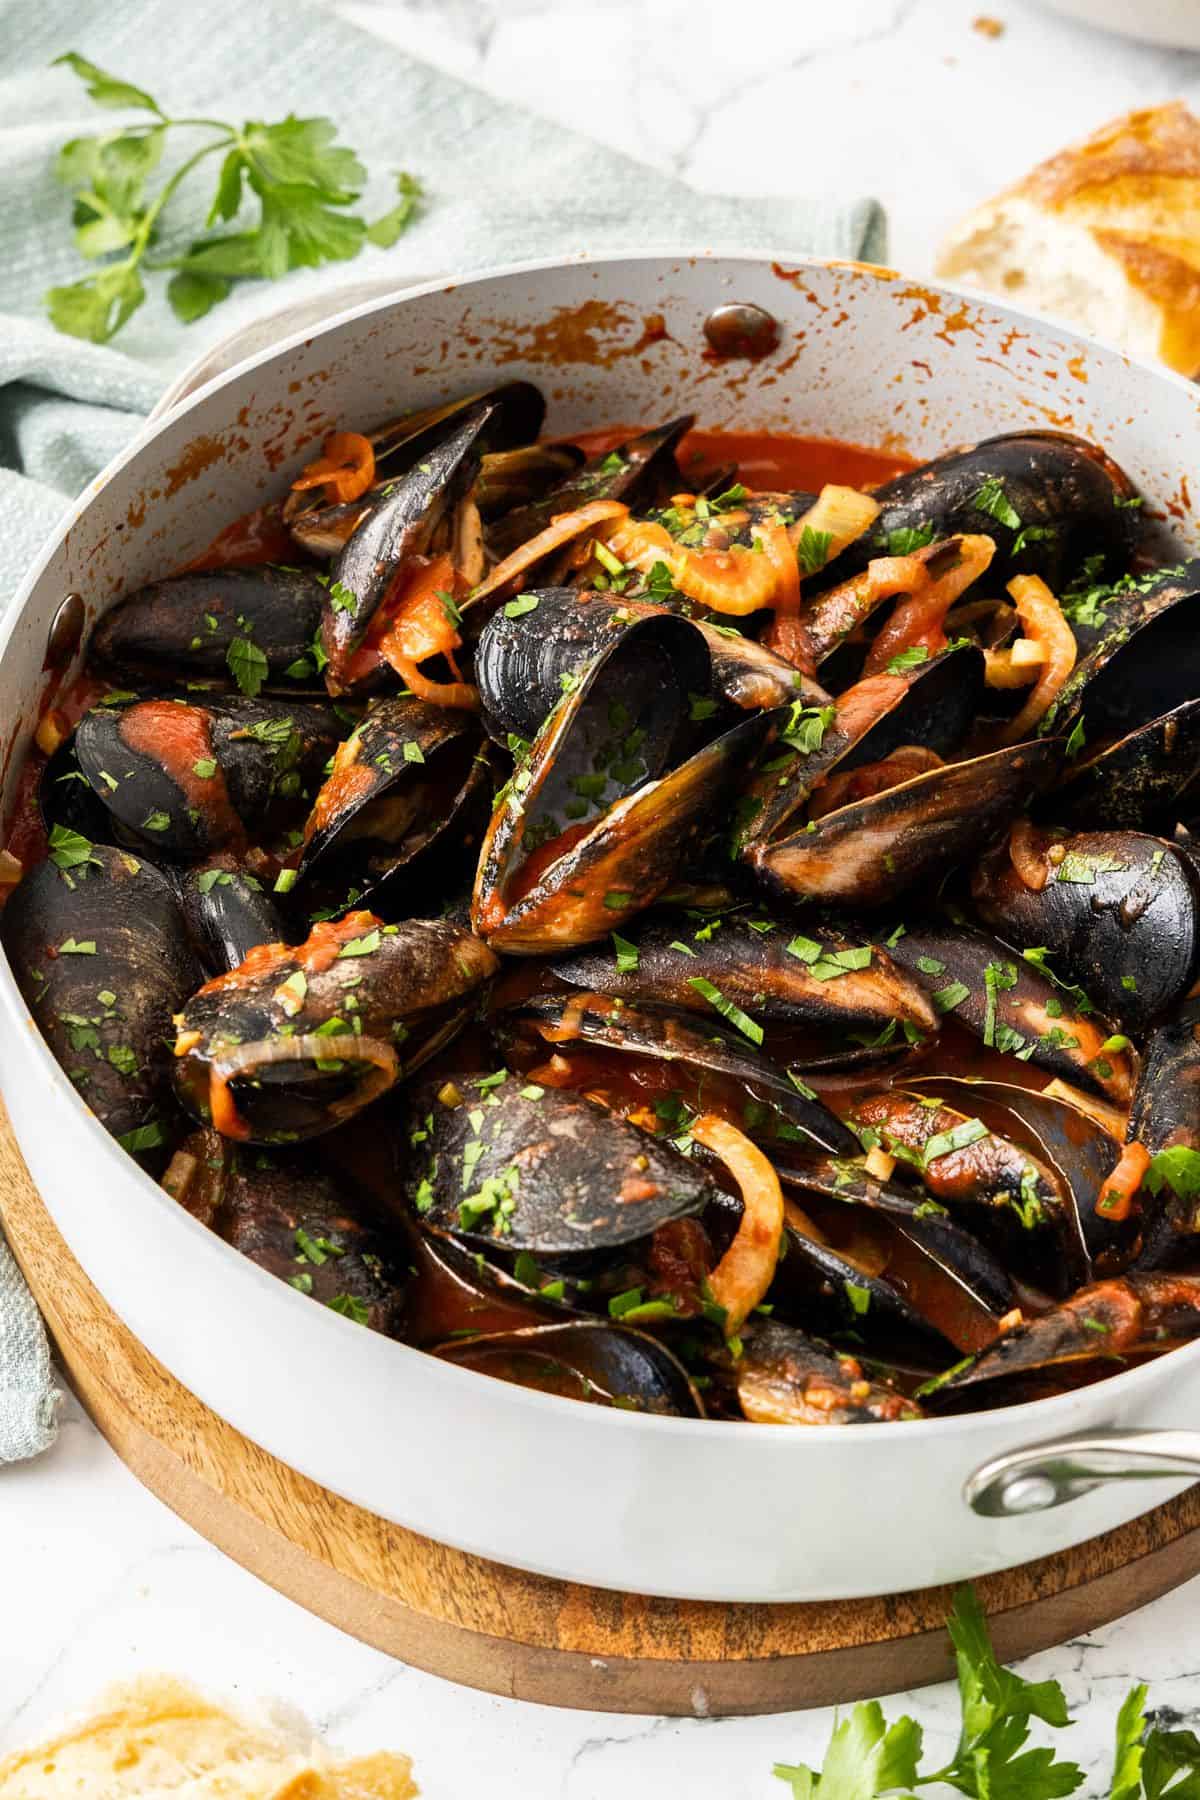 Frying pan with steamed mussels in tomato sauce, sprinkled with a parsley garnish, and some pieces of bread around the edge.